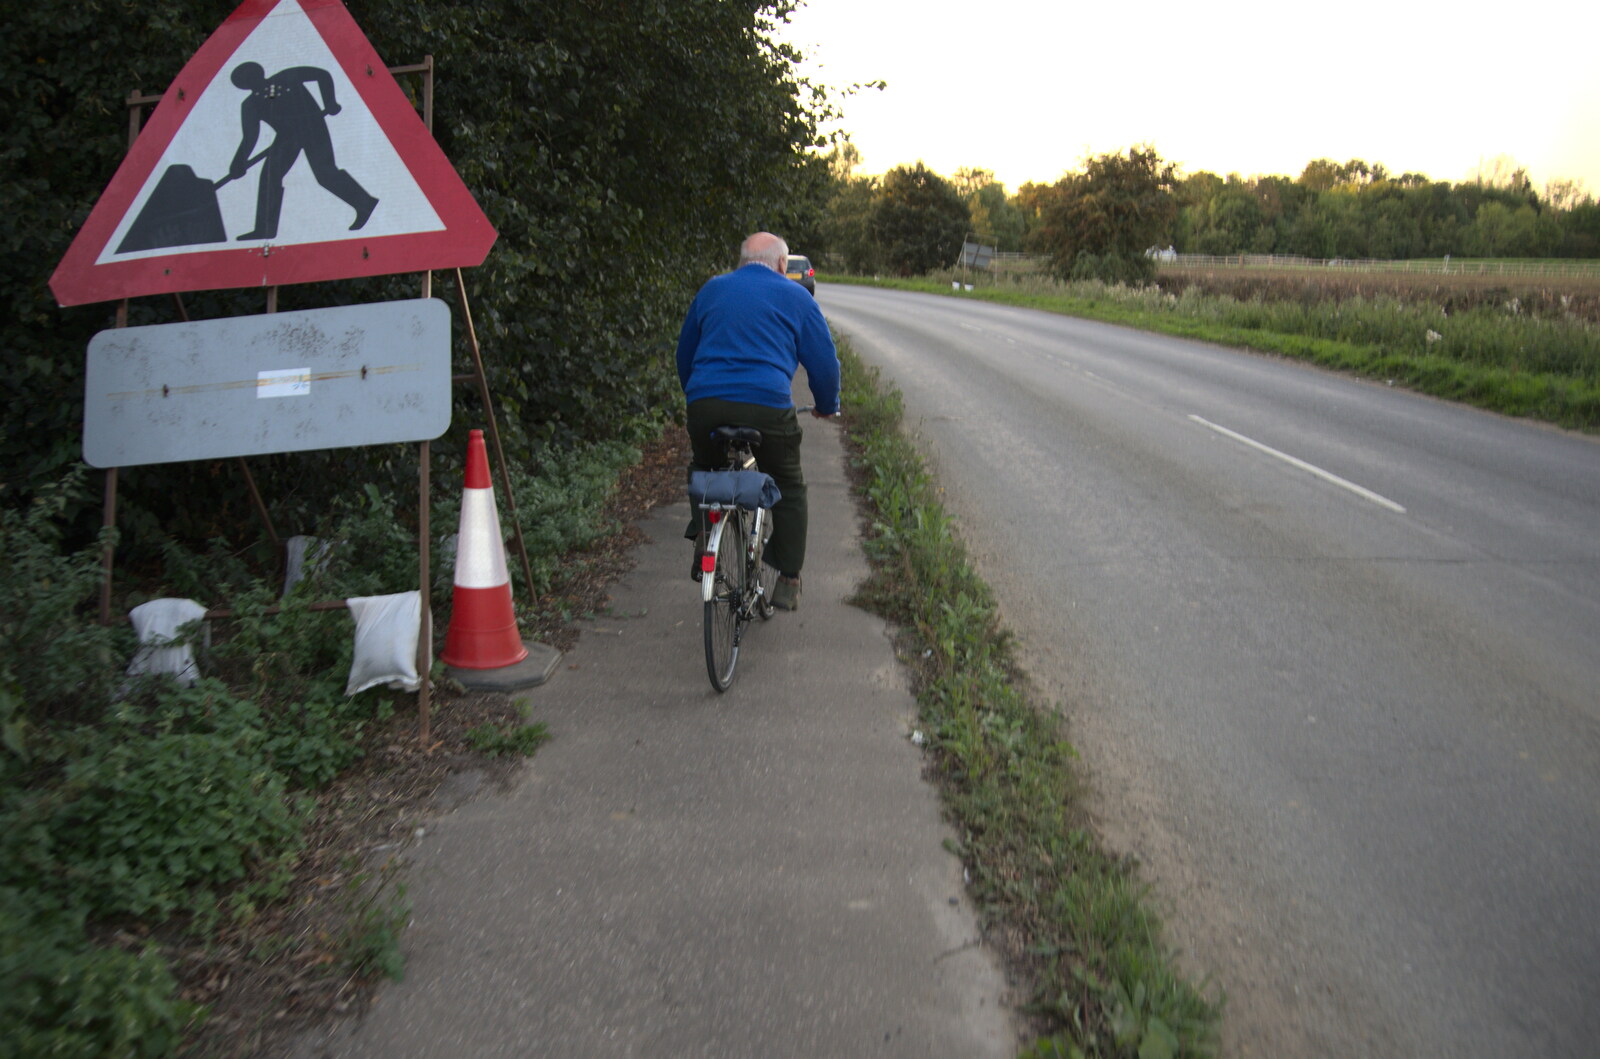 Mick on the cyce path up to the Yaxley roundabout from Cycling Eye Airfield and Station 119, Eye, Suffolk - 9th September 2020